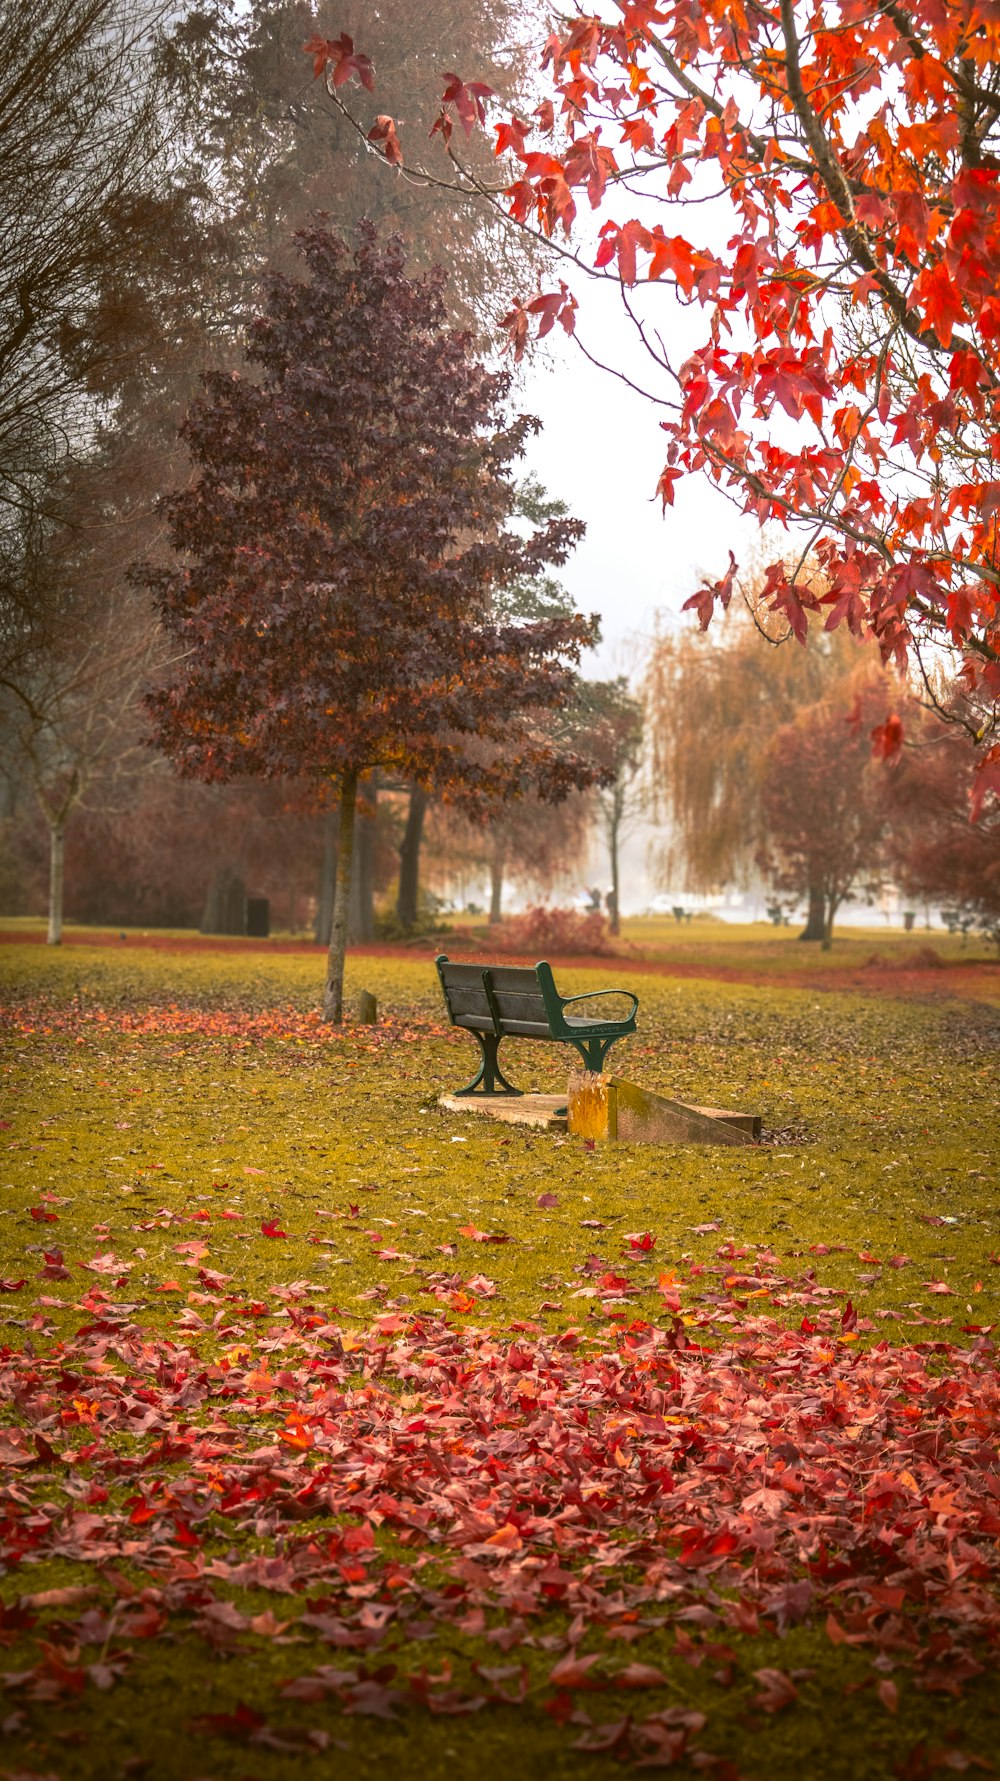 a park bench surrounded by fallen leaves and trees